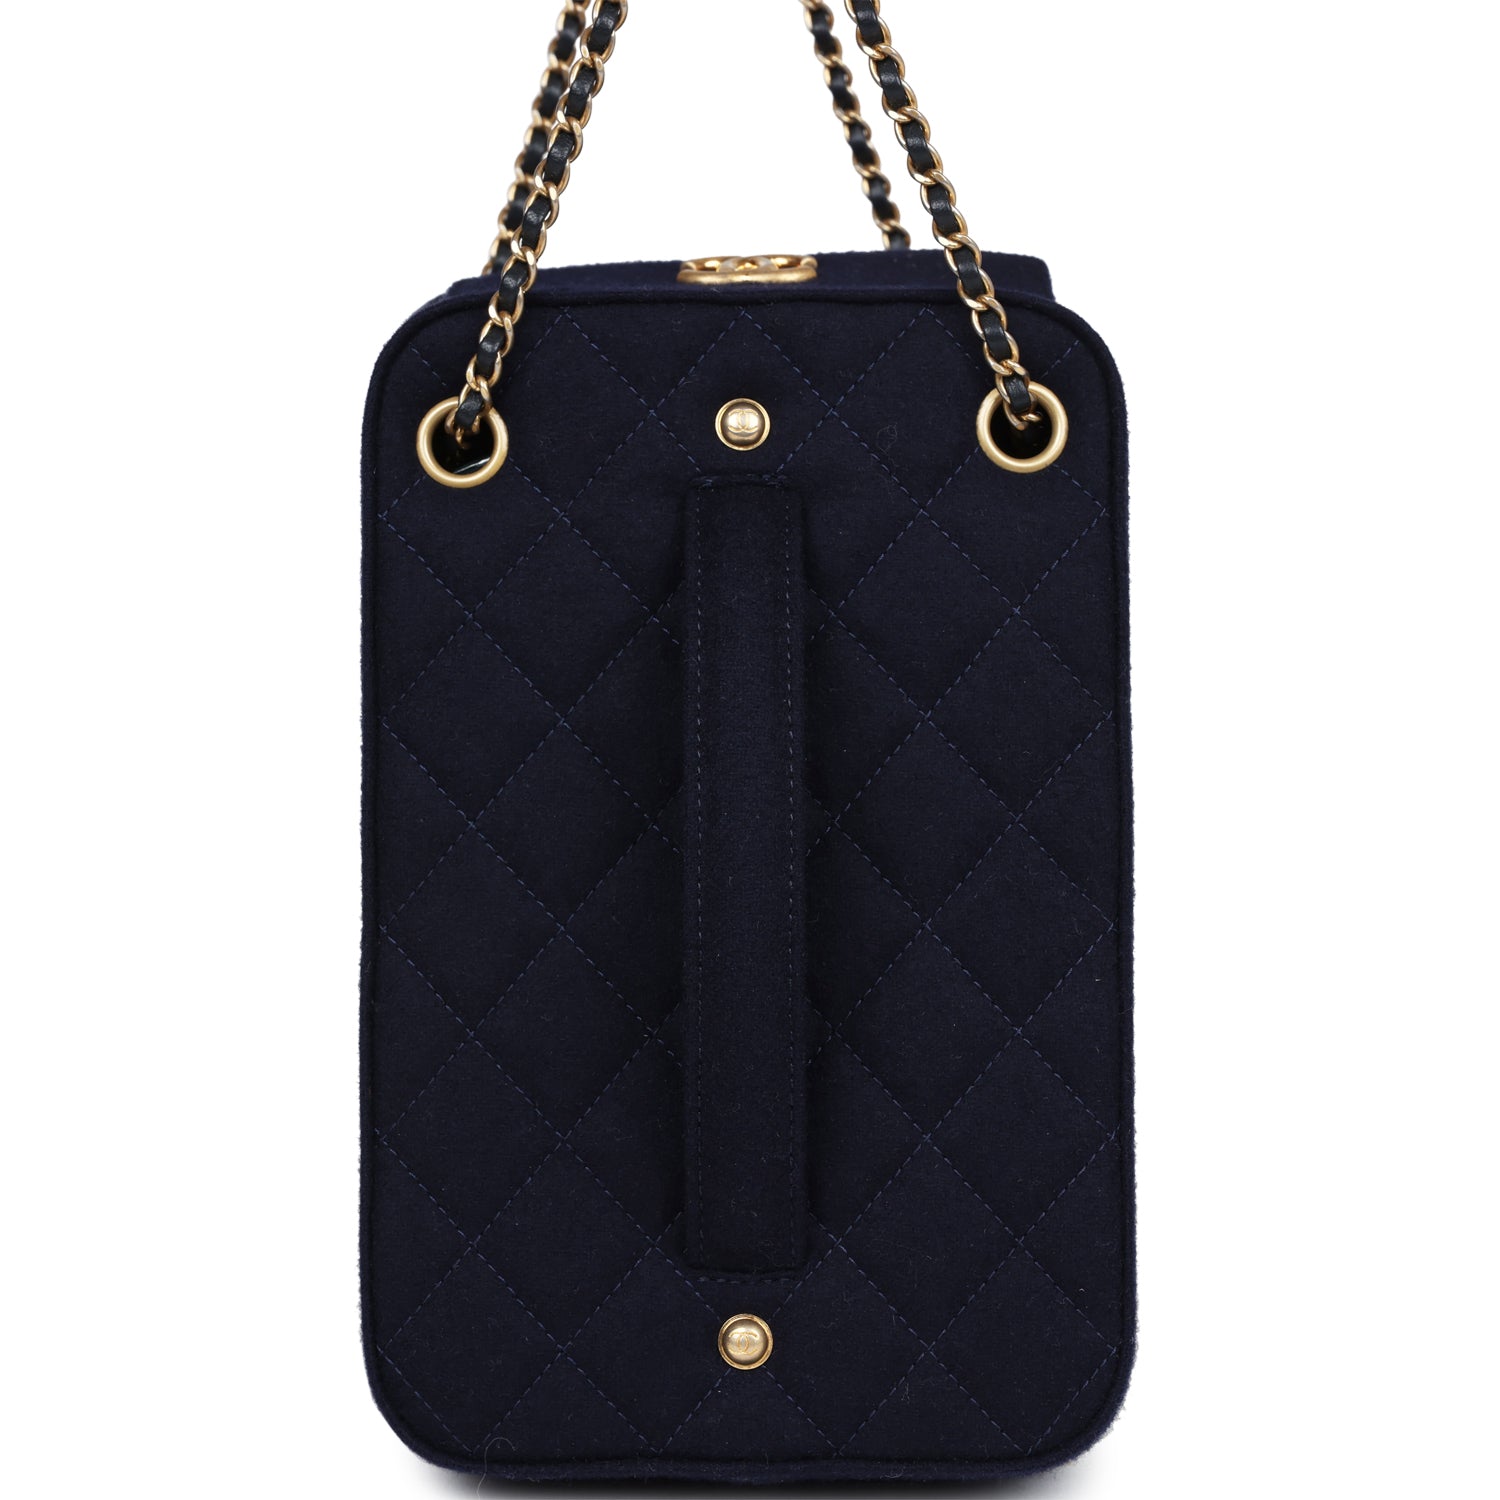 Chanel Paris-Hamburg Accordion Bag Quilted Navy Blue Wool Aged Gold Hardware